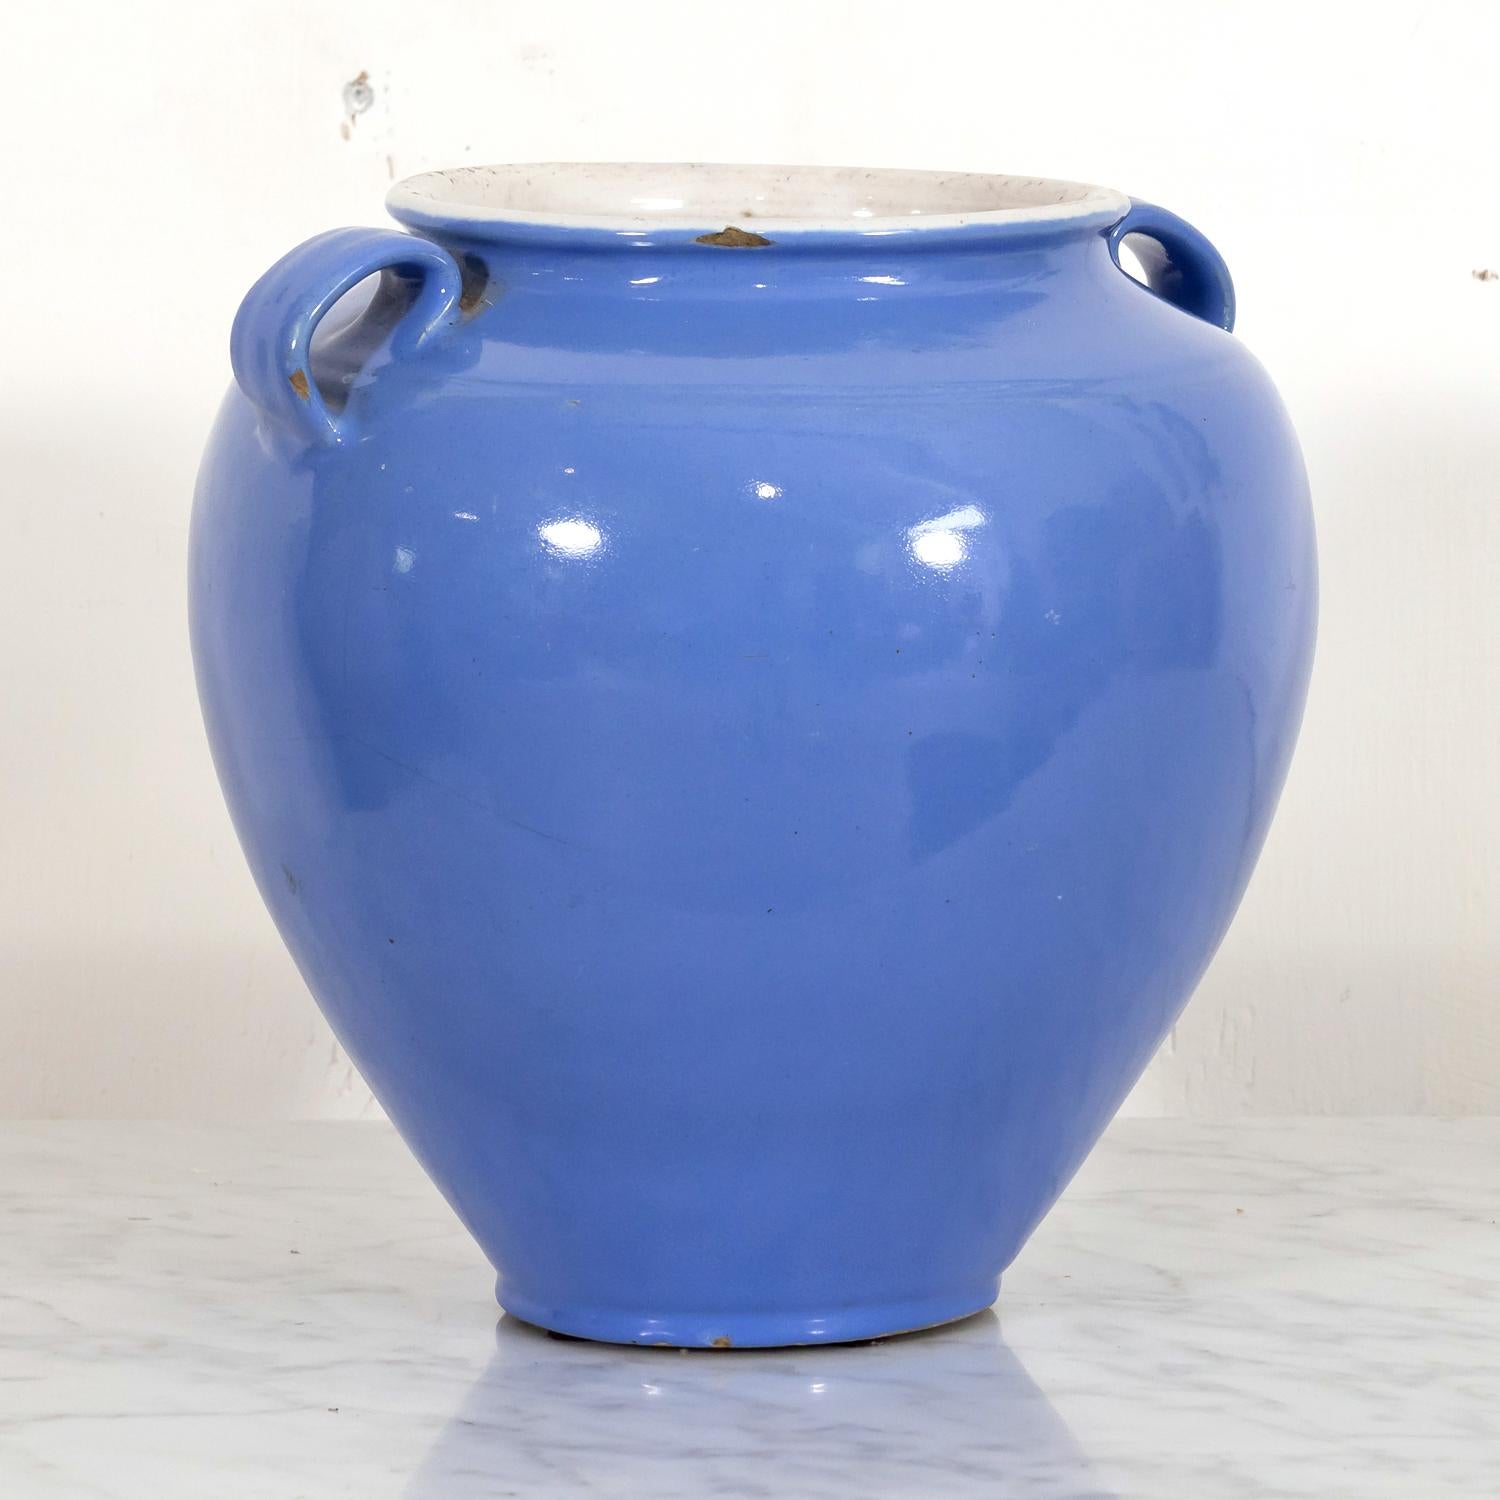 Rare 19th Century French Confit Pot or Egg Pot with Blue Glaze In Good Condition For Sale In Birmingham, AL